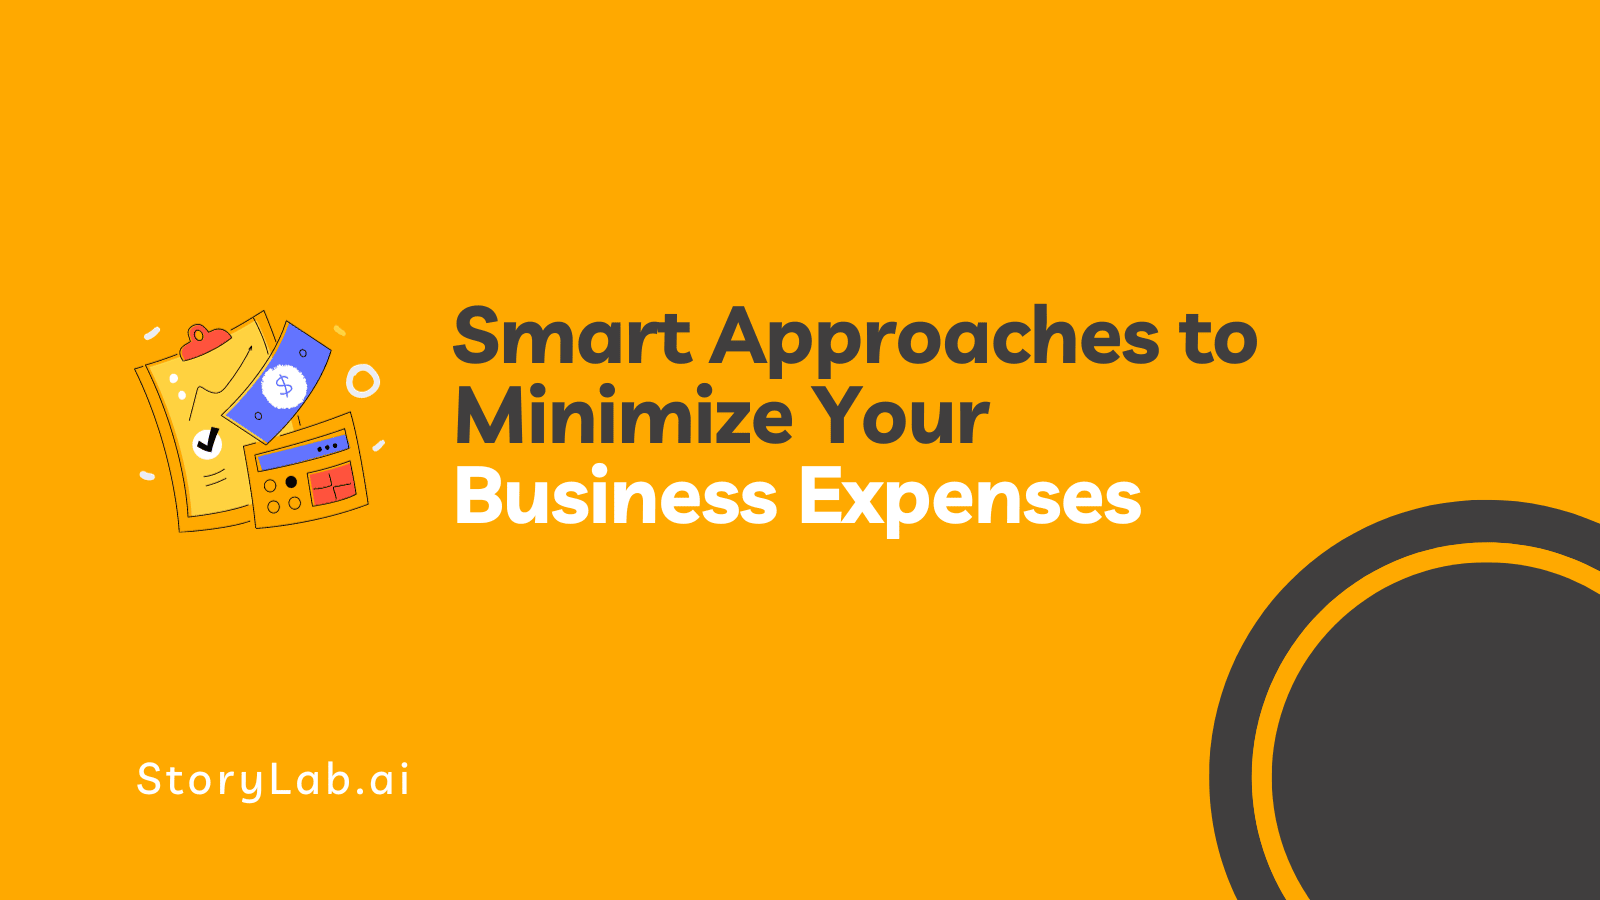 Smart Approaches to Minimize Your Business Expenses